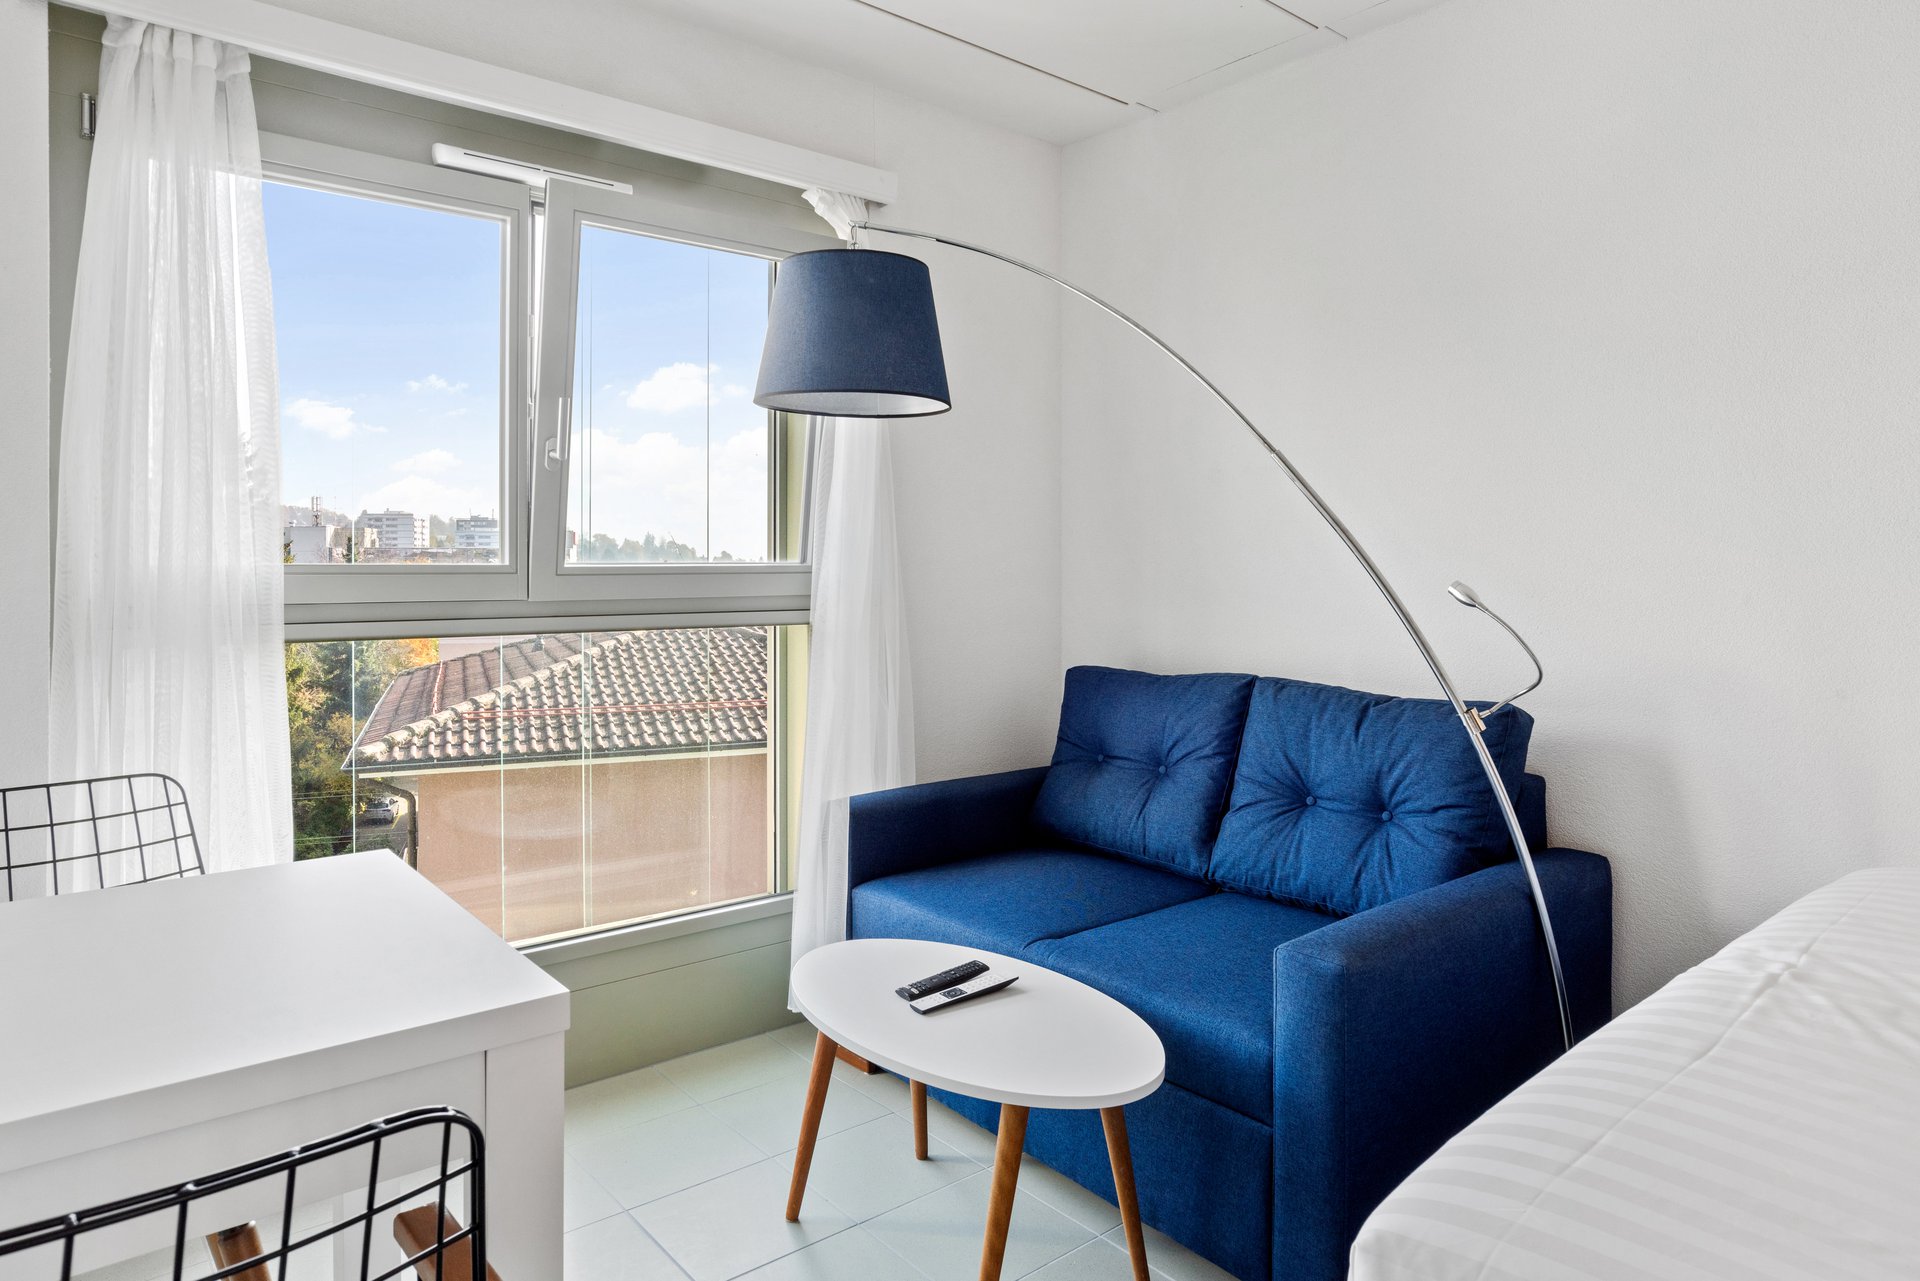 Close to the Park of L’Hermitage, the CHUV and a few minutes away from the EHL, this new furnished studio features a kitche